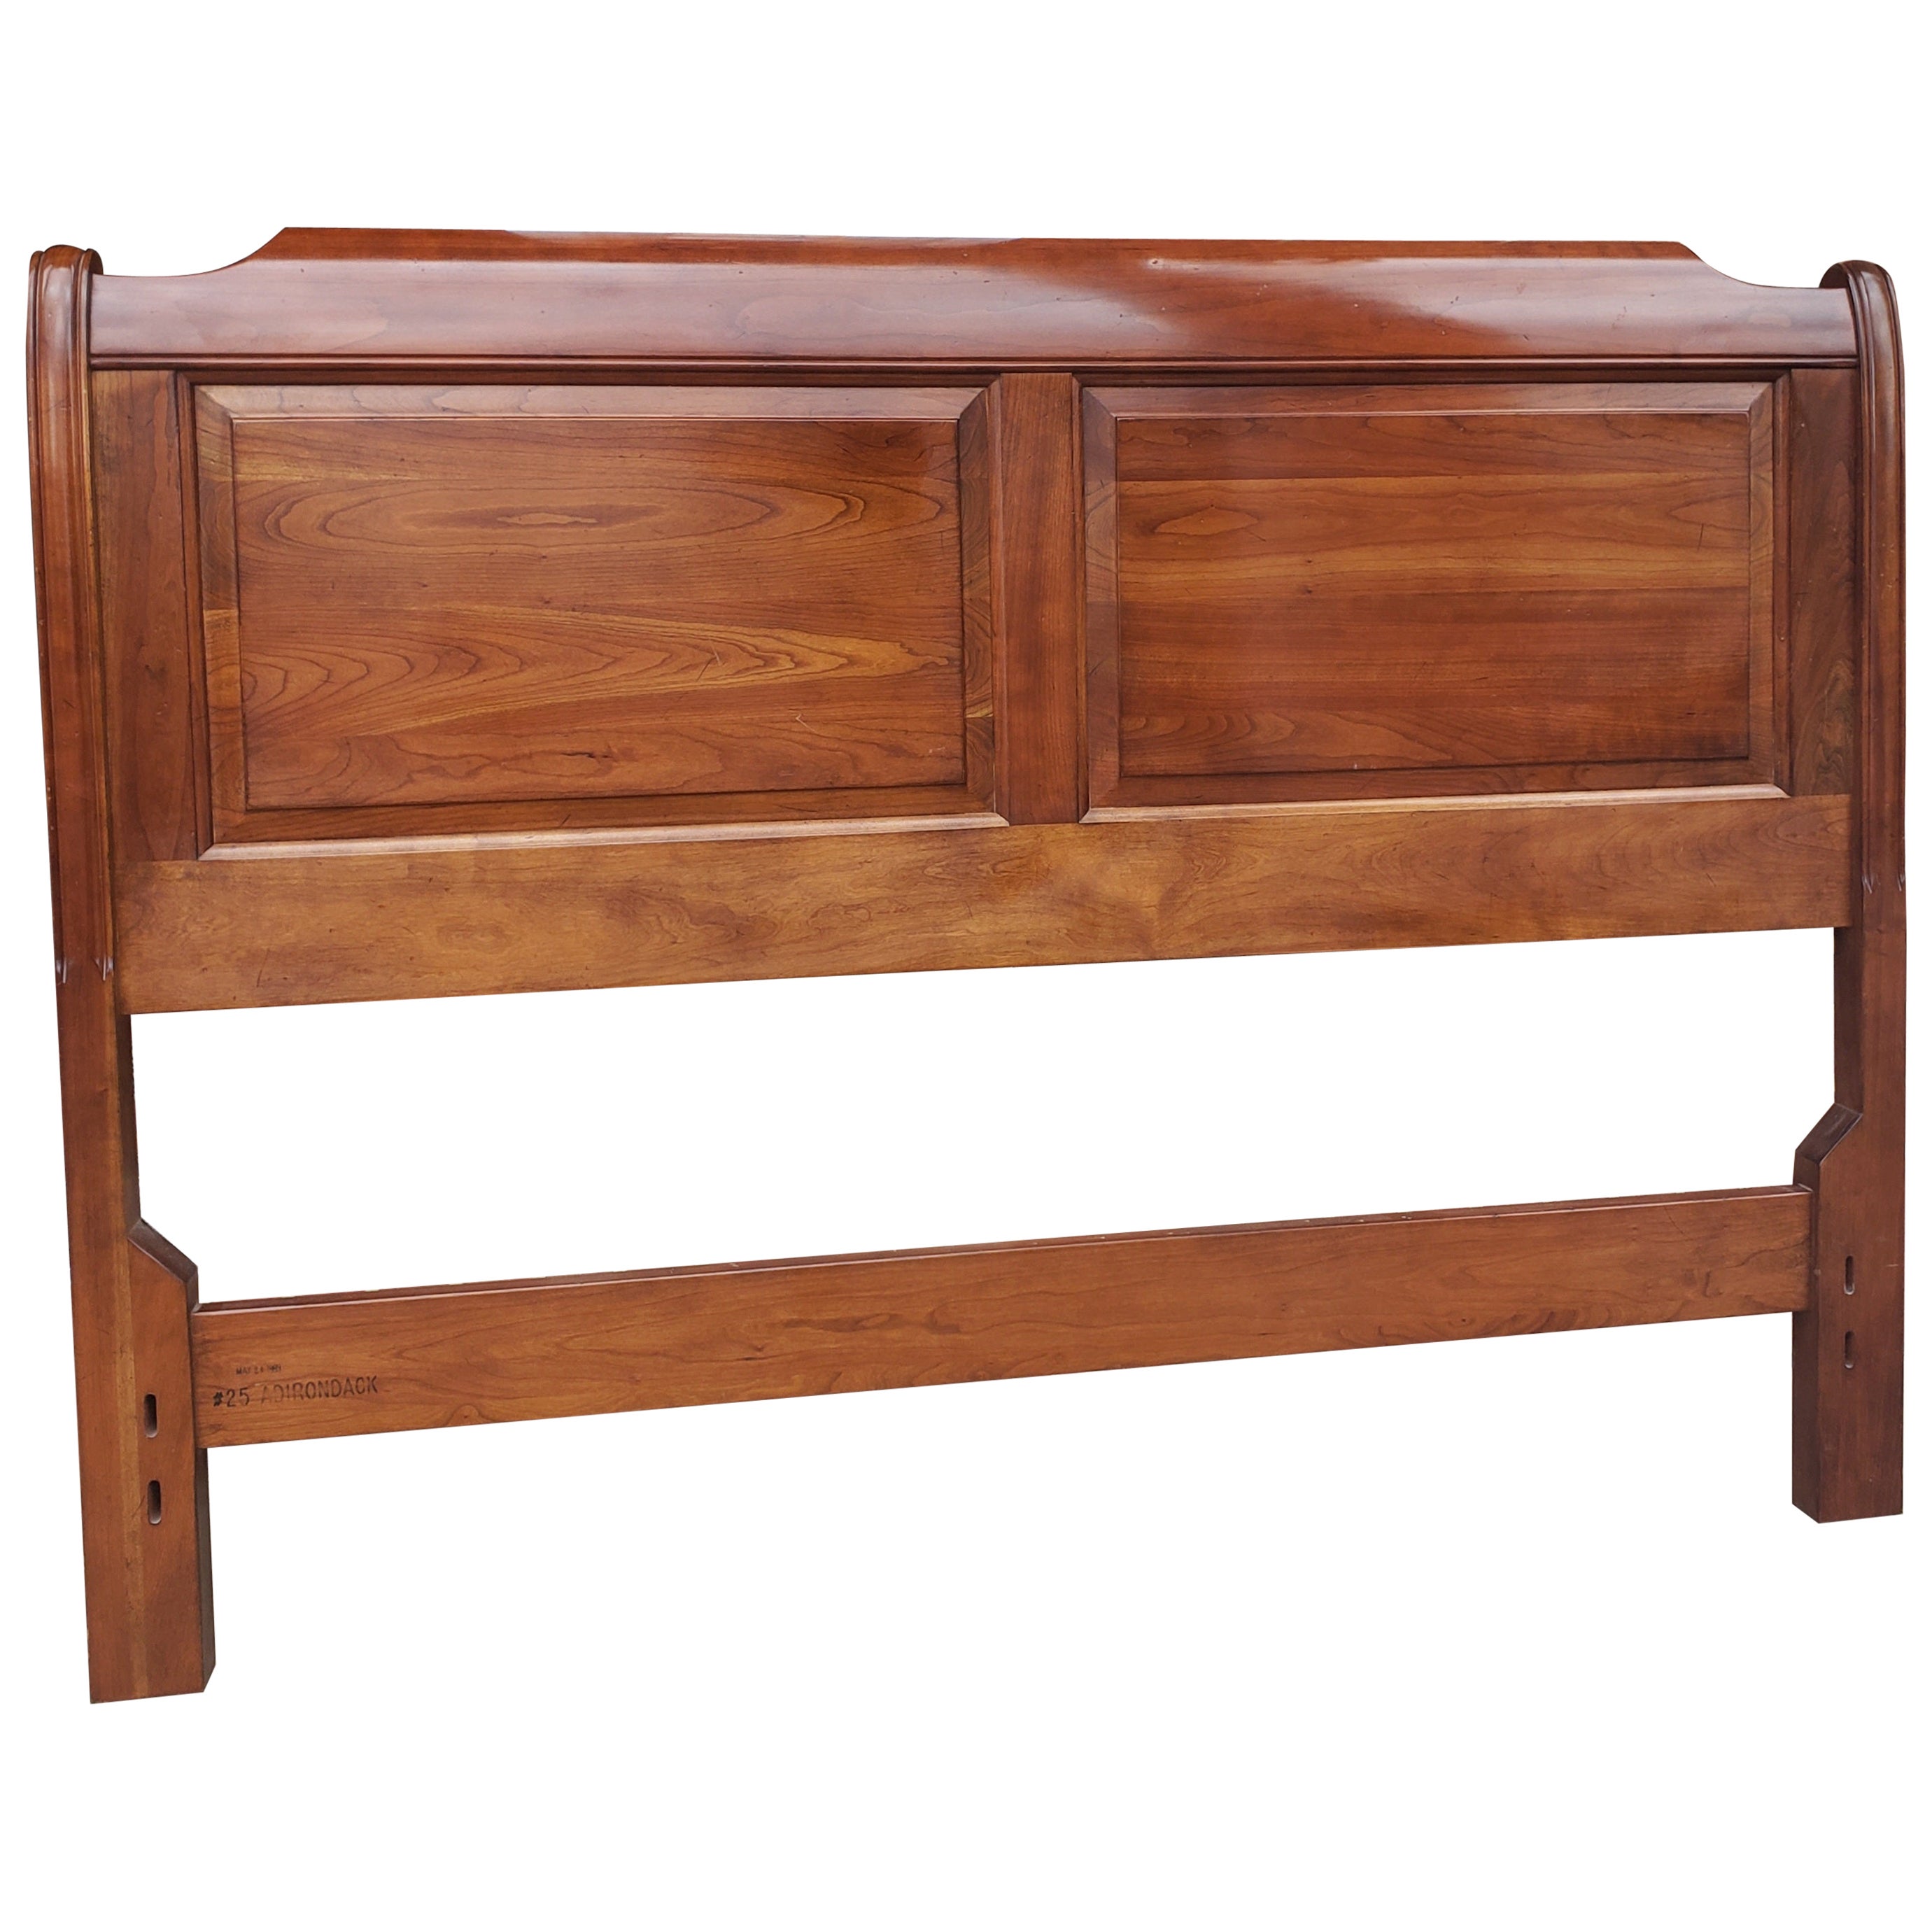 Stickley Solid Cherry Panels Full Size Headboard